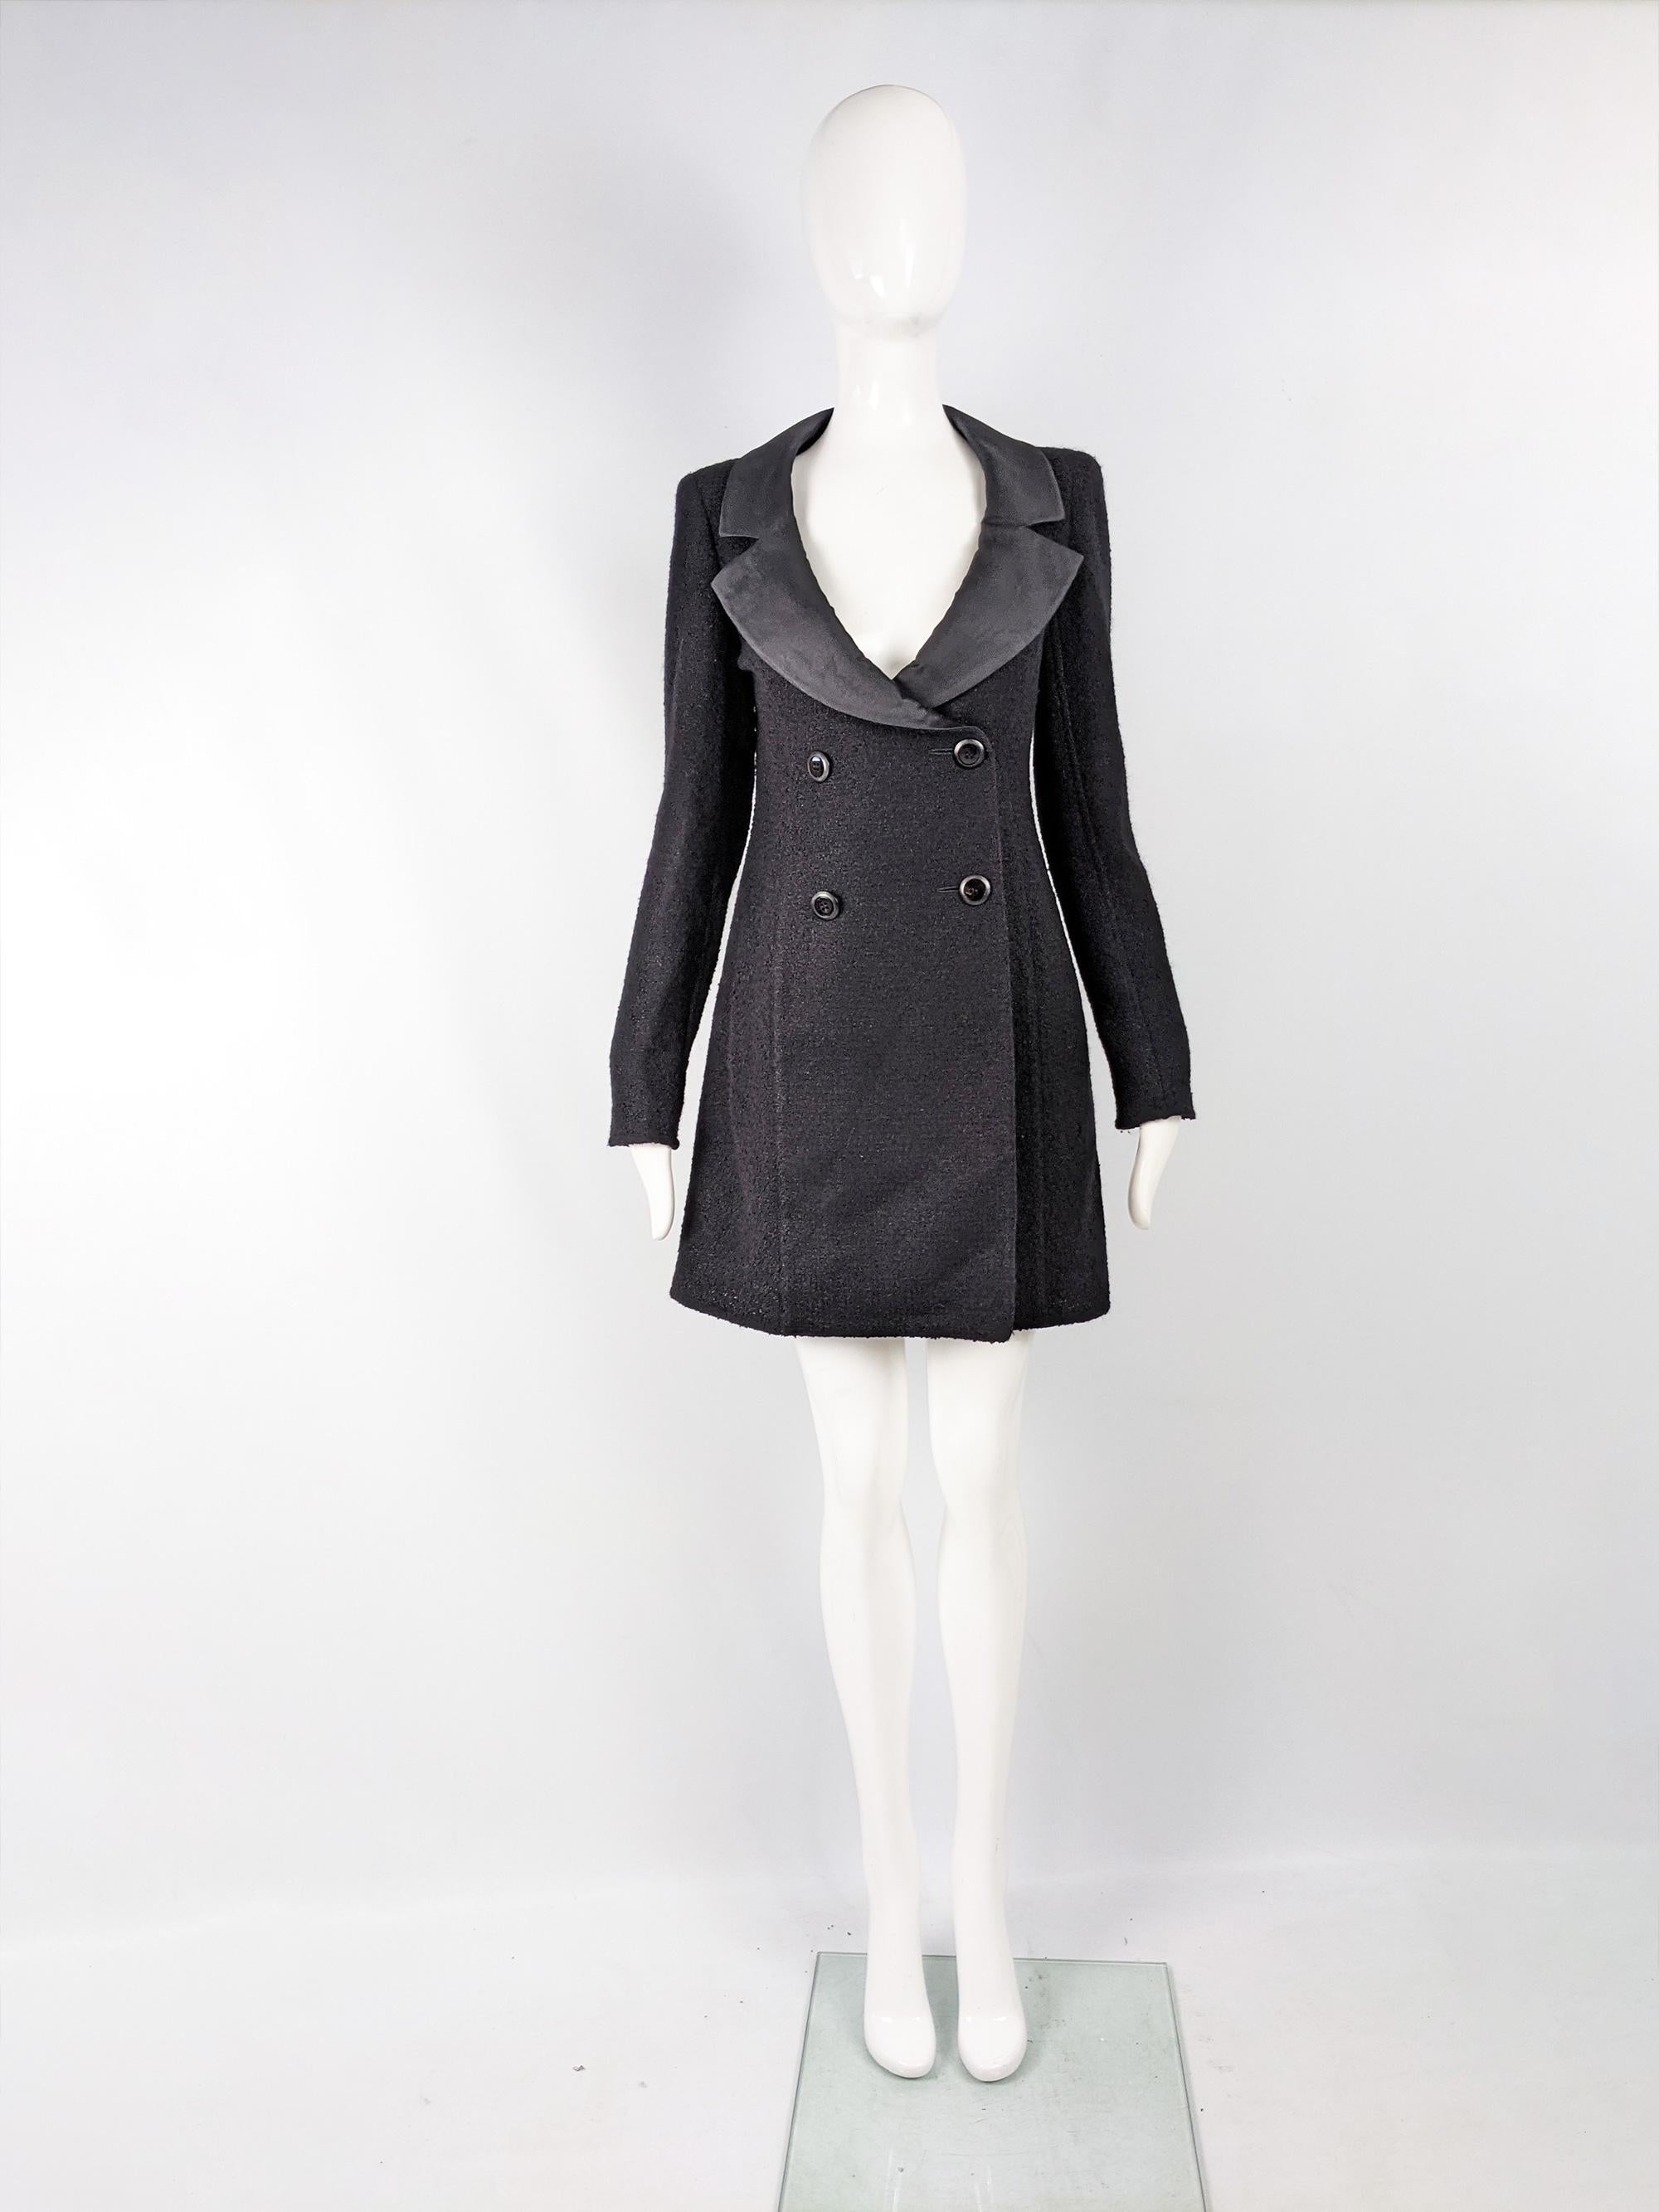 An ultra chic hip length vintage womens Valentino tailored blazer jacket from the early 90s in a lightweight black bouclé tweed with a deep scoop neckline and double breasted buttons with moiré taffeta lapels. 

Size: Not indicated; fits like a UK